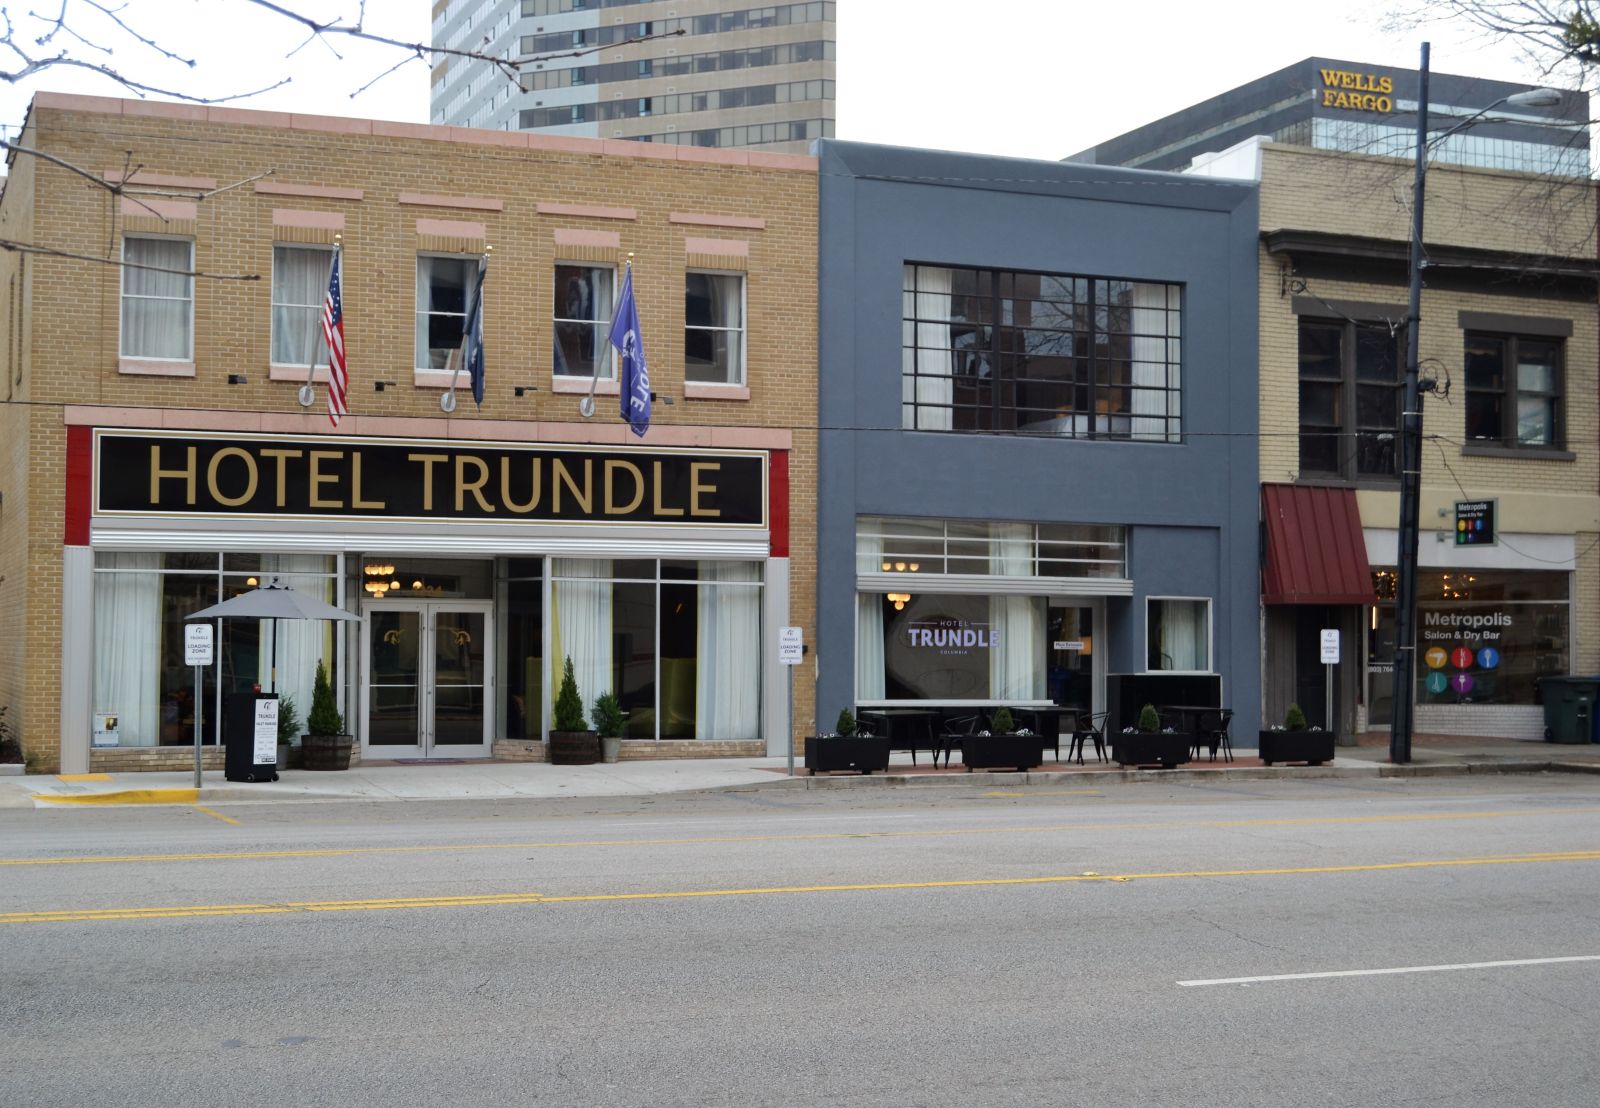 Hotel Trundle was once the site of three empty buildings at the corner of Taylor and Sumter streets before being renovated into the Main Street district's first boutique hotel in a project that took advantage of historic tax credits. (Photo/Melinda Waldrop)